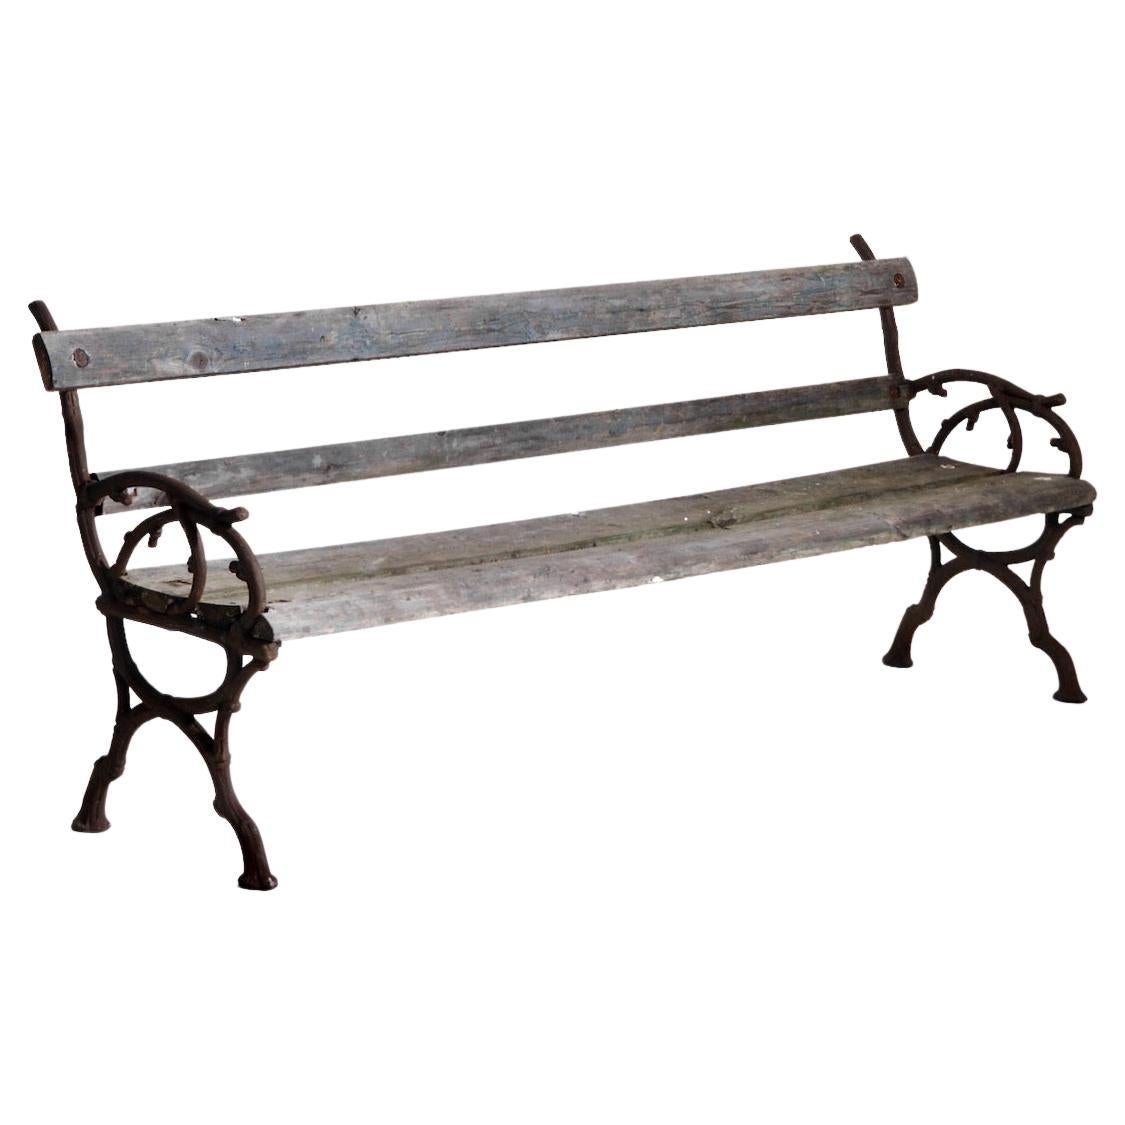 Charming Original Painted Garden Bench, Probably Swedish, 19th Century For Sale